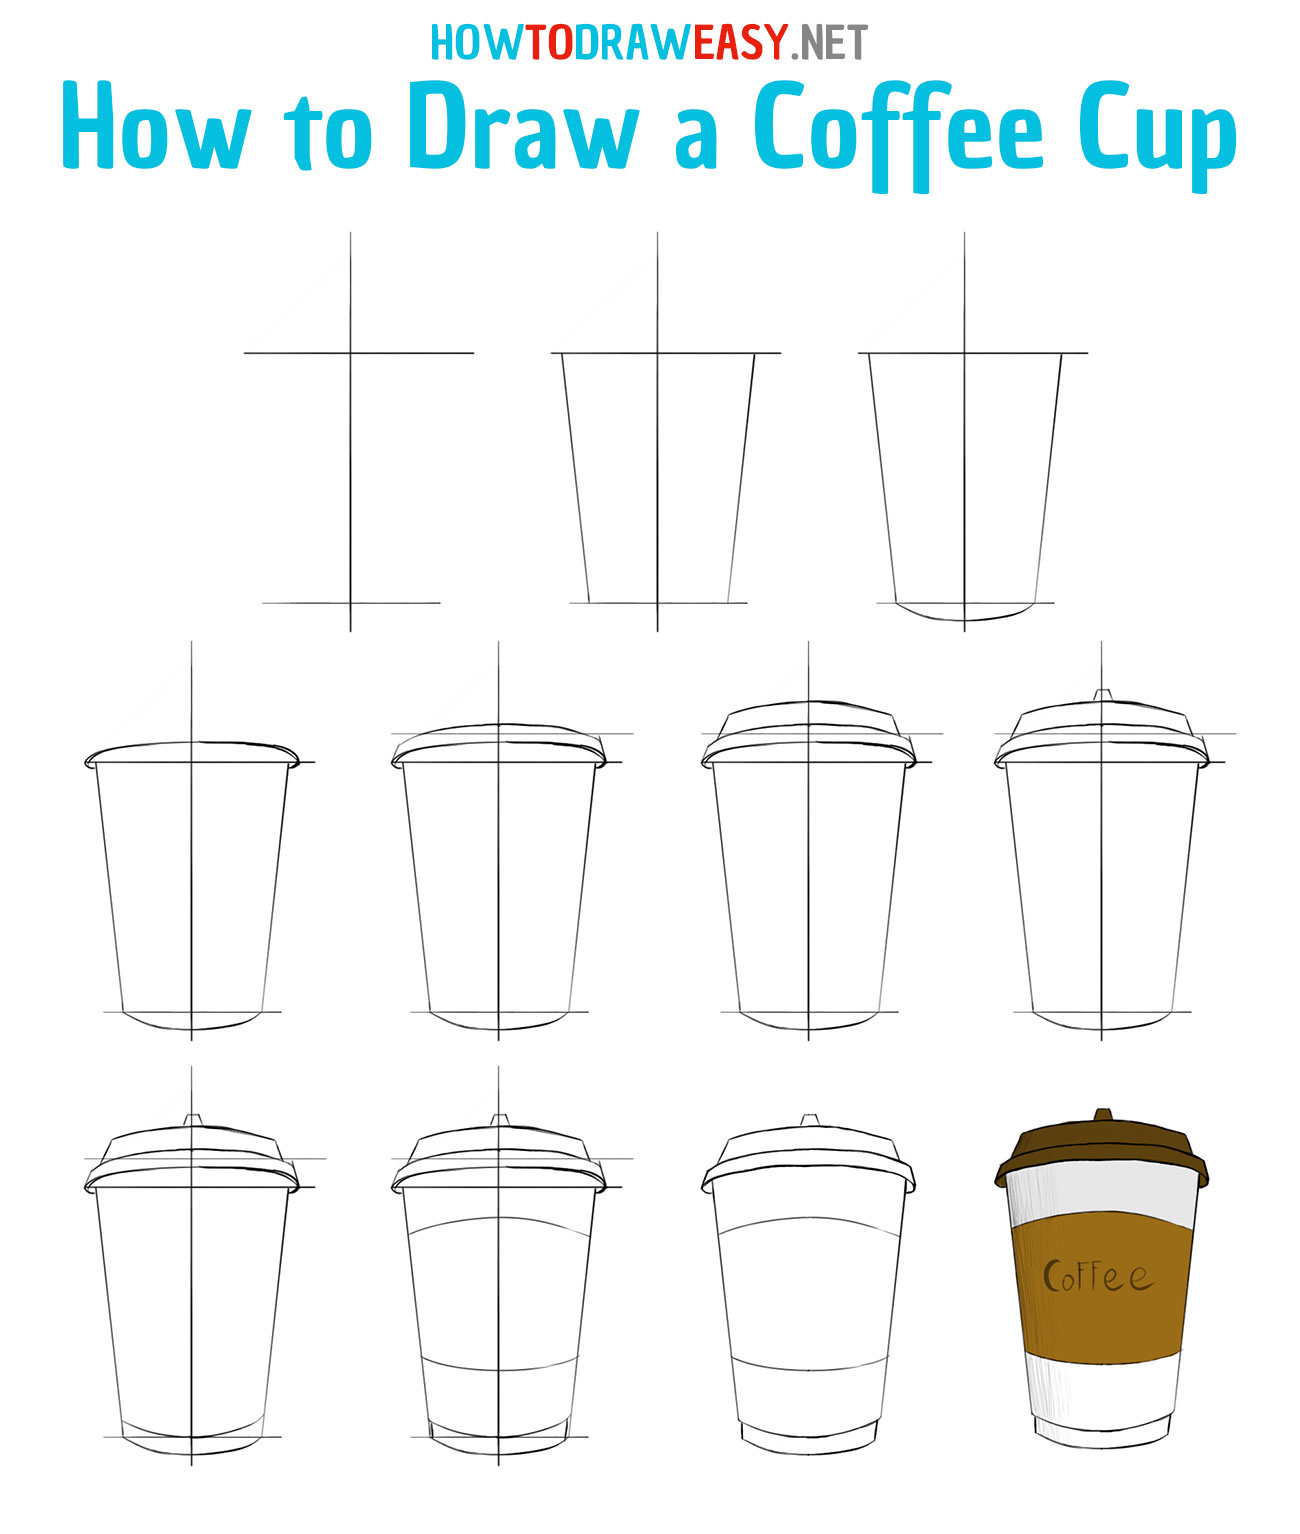 How to Draw a Coffee Cup Step by Step